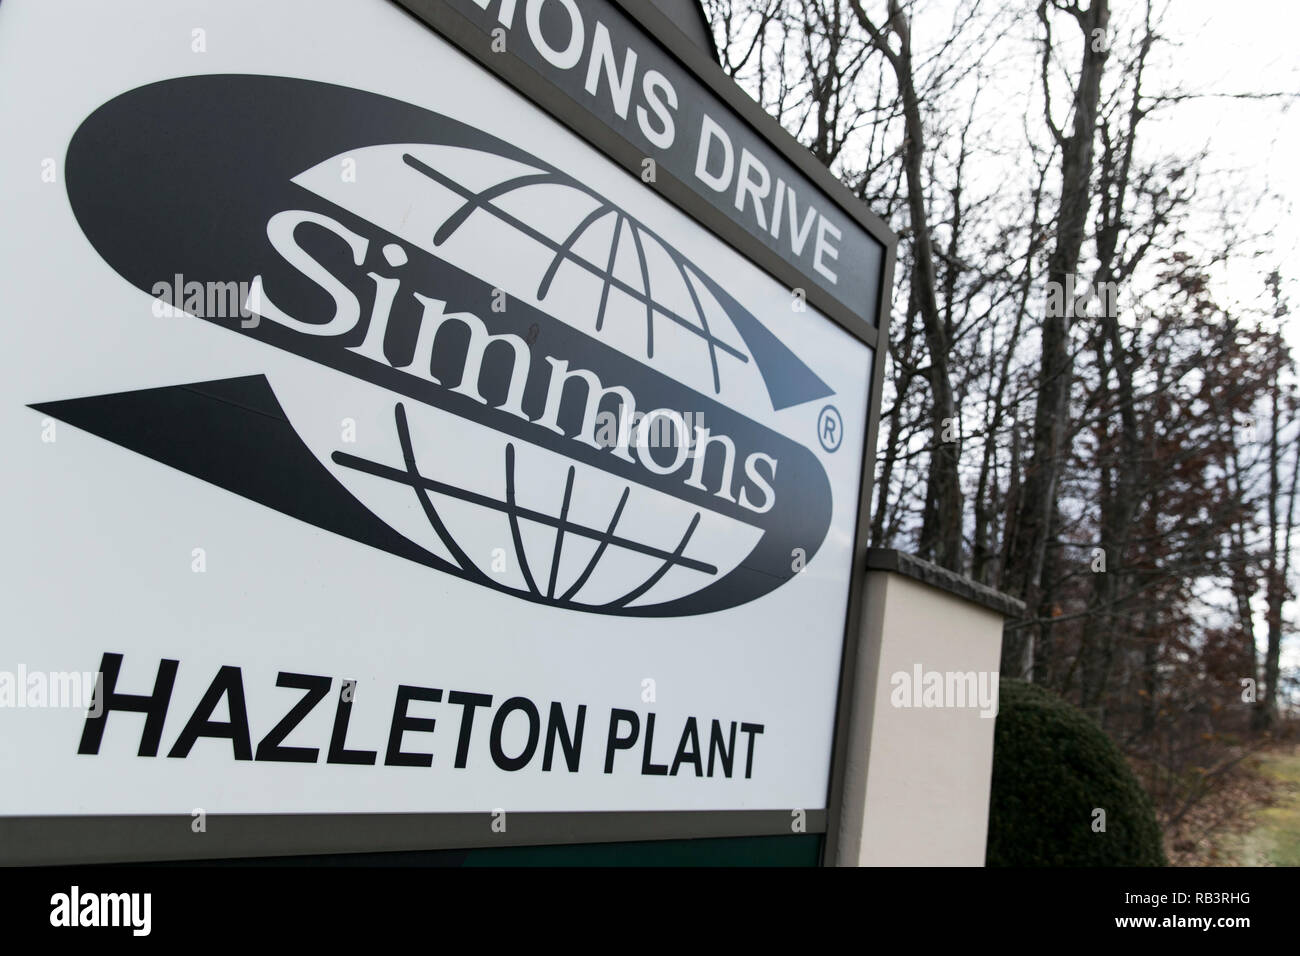 A logo sign outside of a facility occupied by The Simmons Bedding Company in Hazle Township, Pennsylvania, on December 29, 2018. Stock Photo